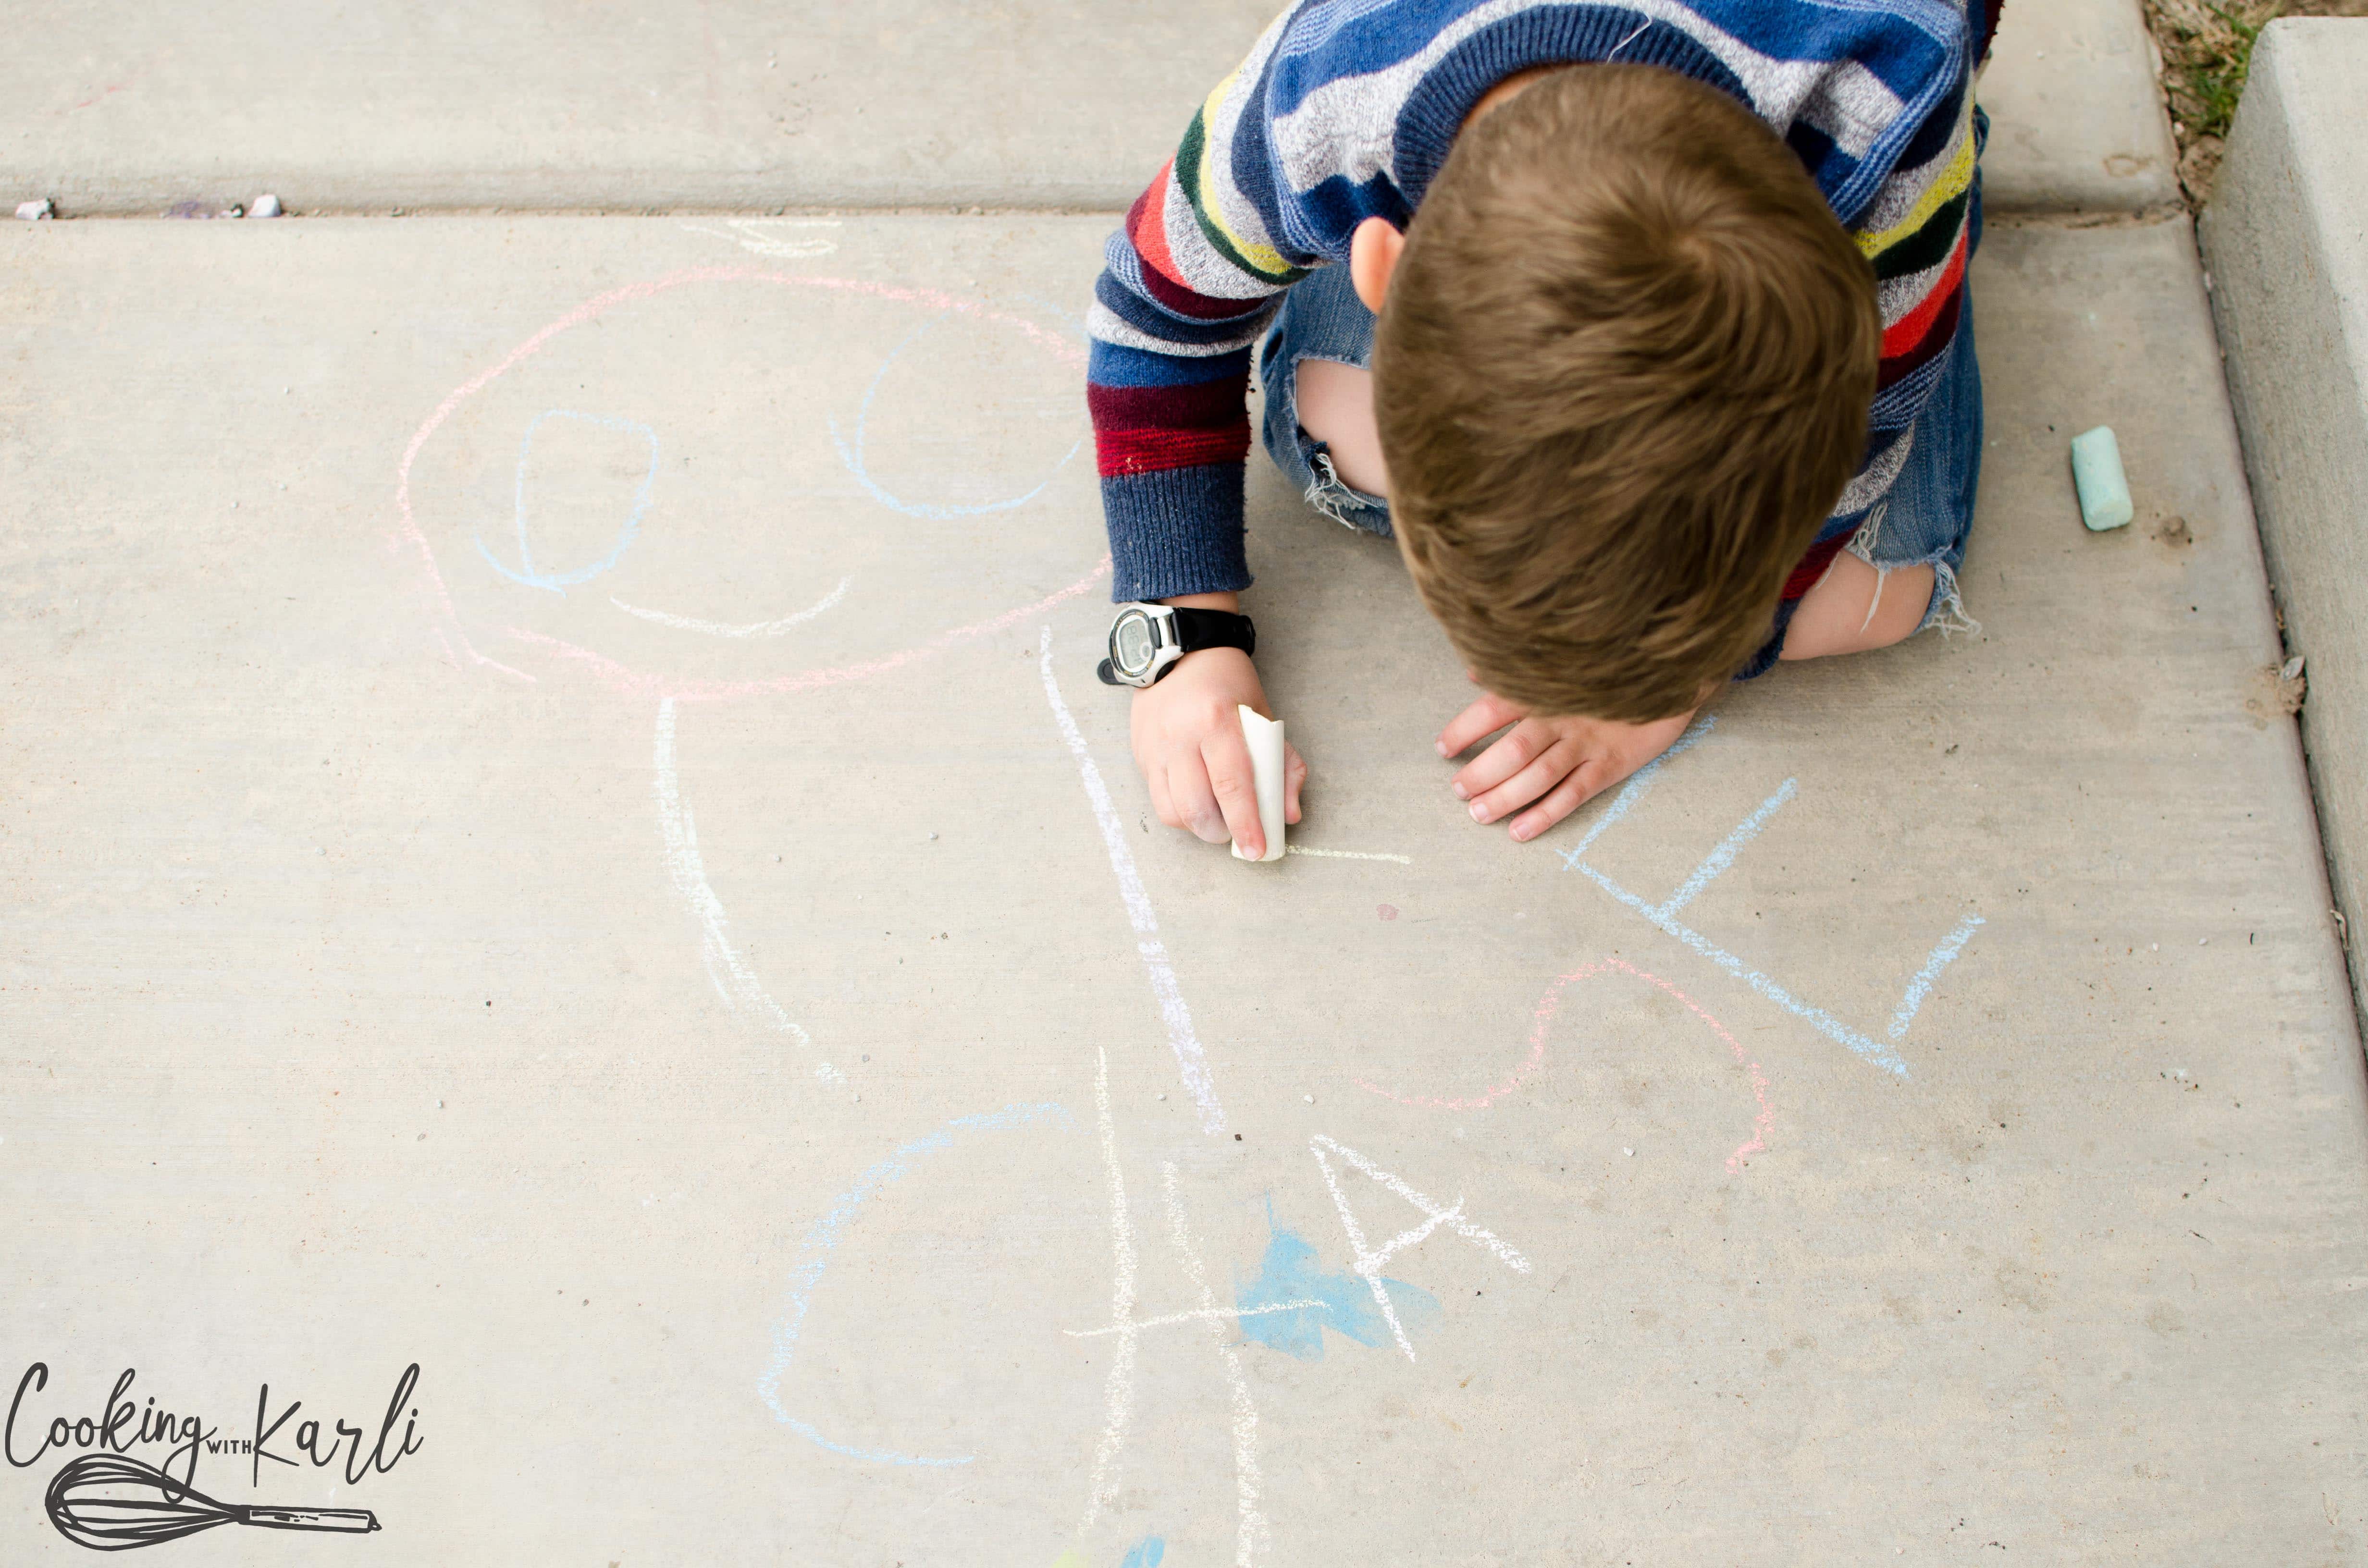 Sidewalk Chalk is a great inexpensive activity for kids of all ages.